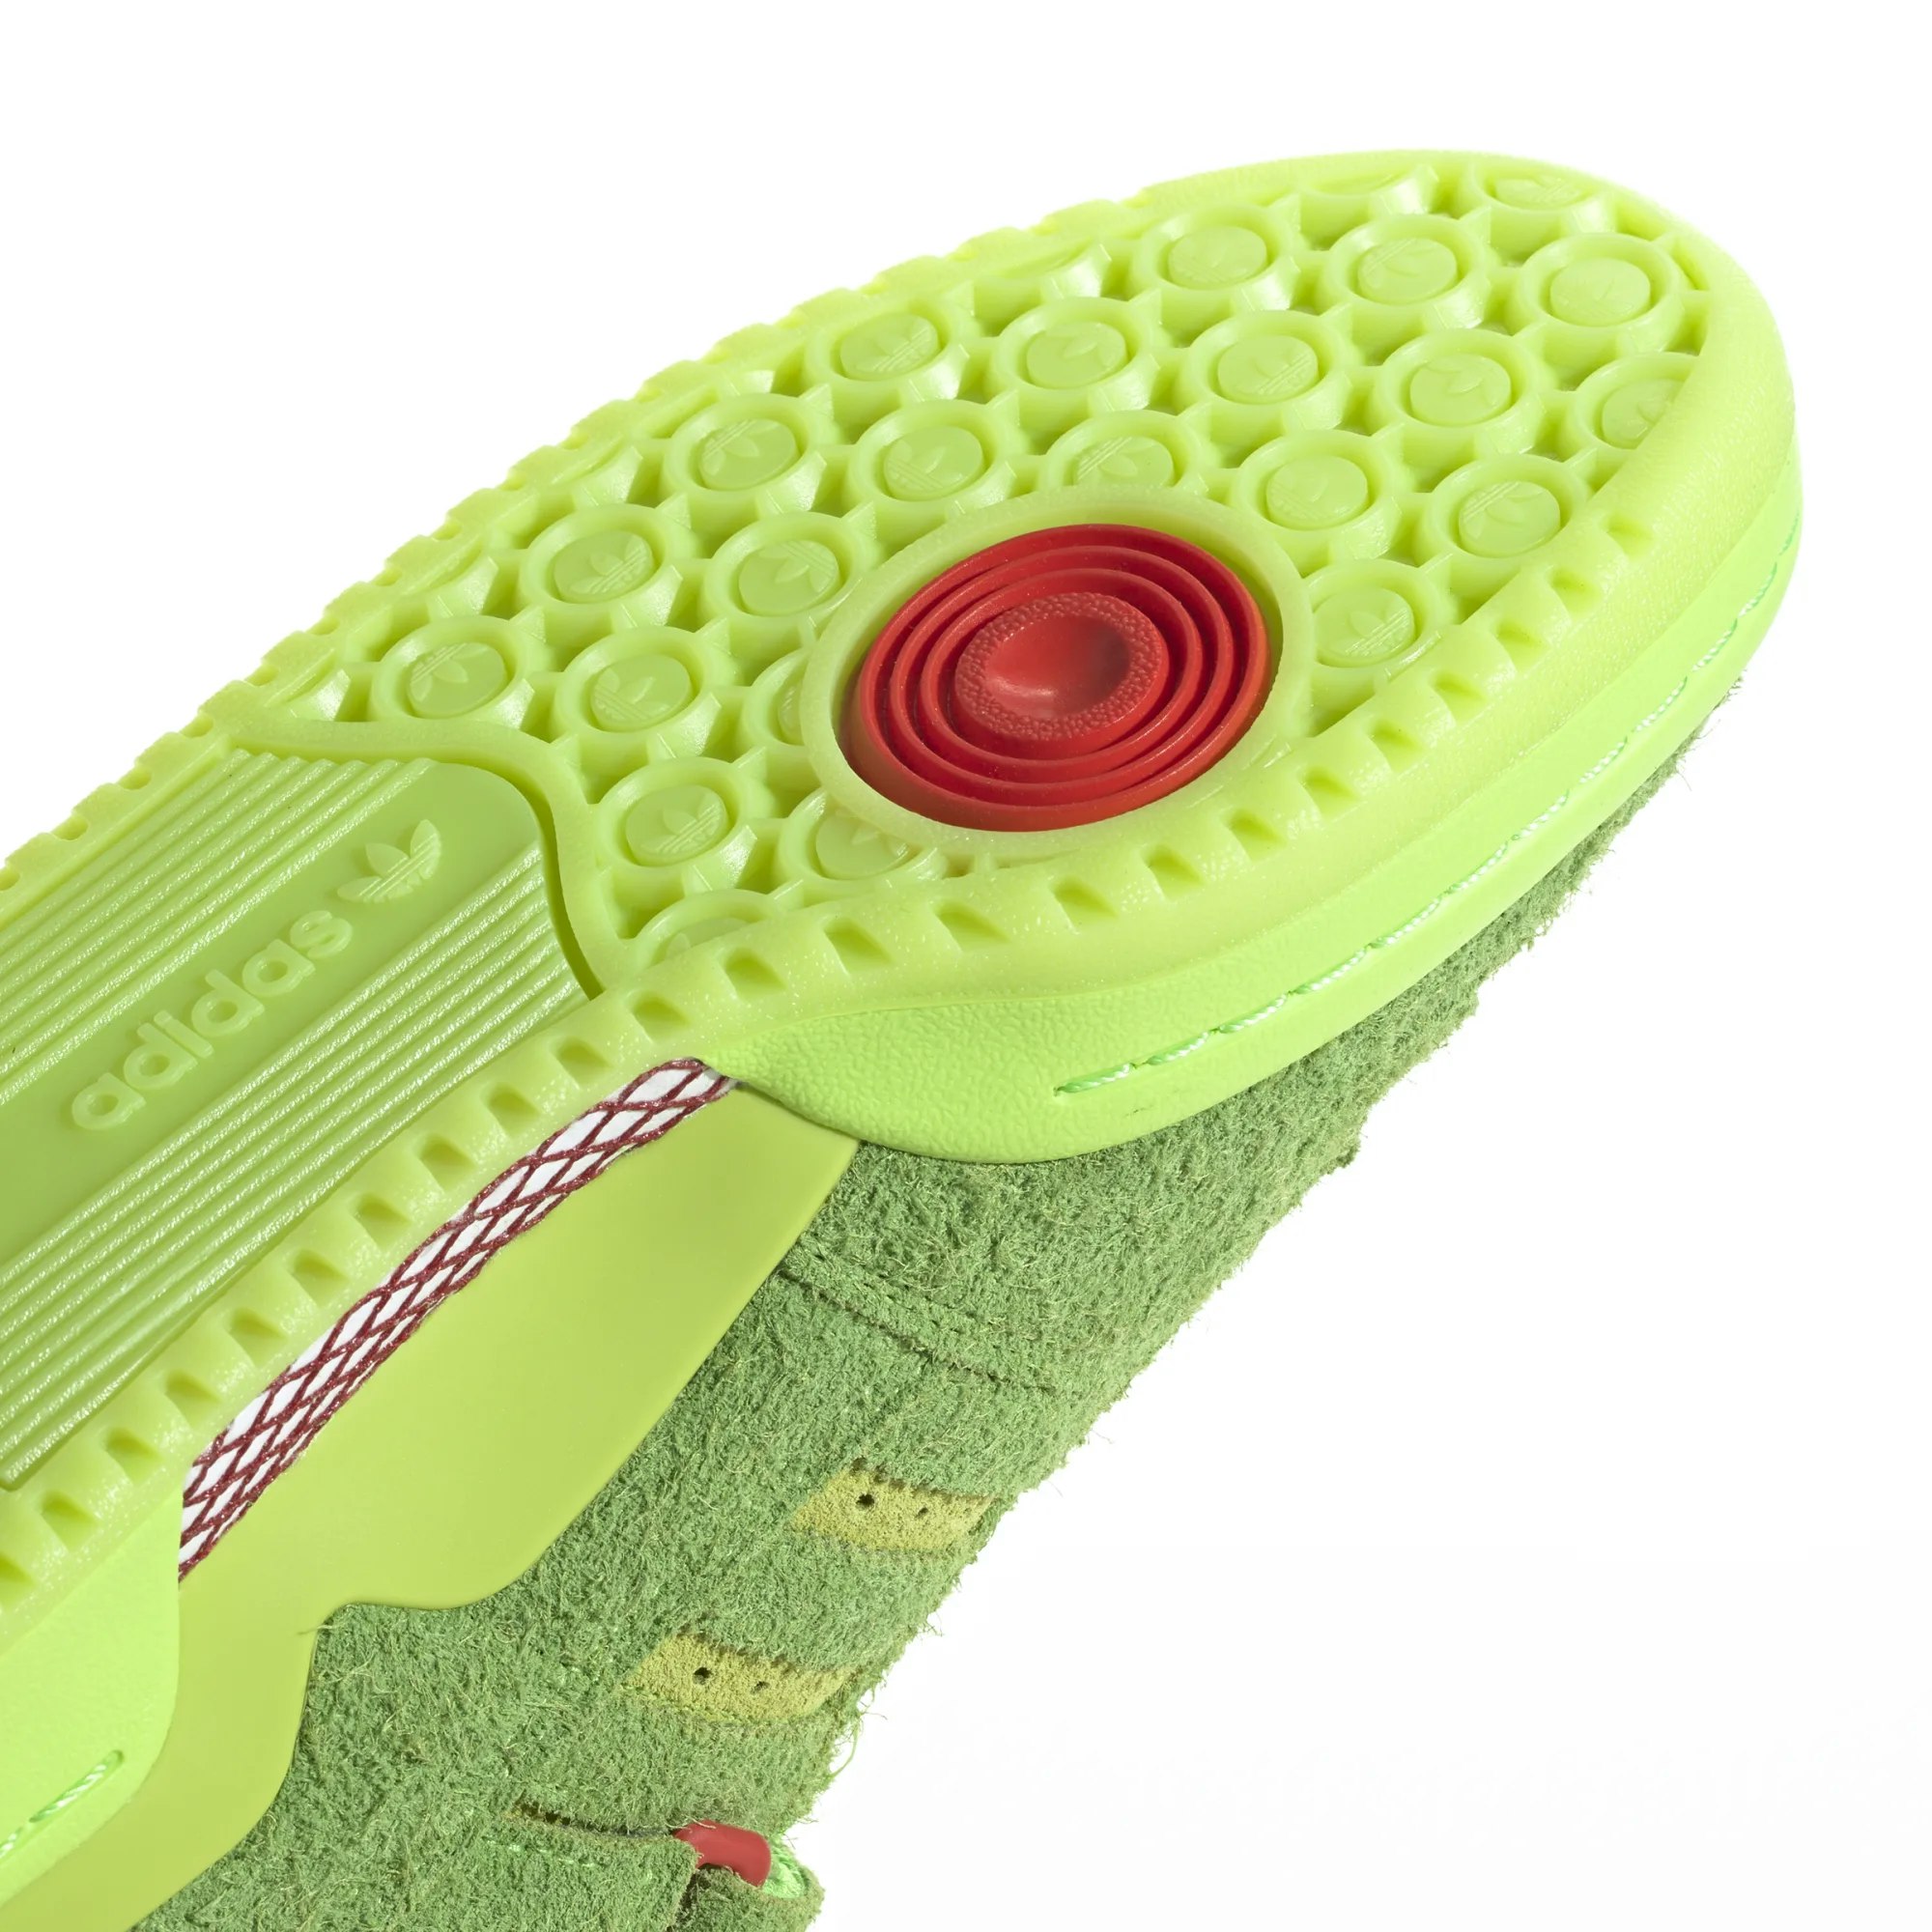 The Grinch x adidas Forum Low "Stole Christmas"